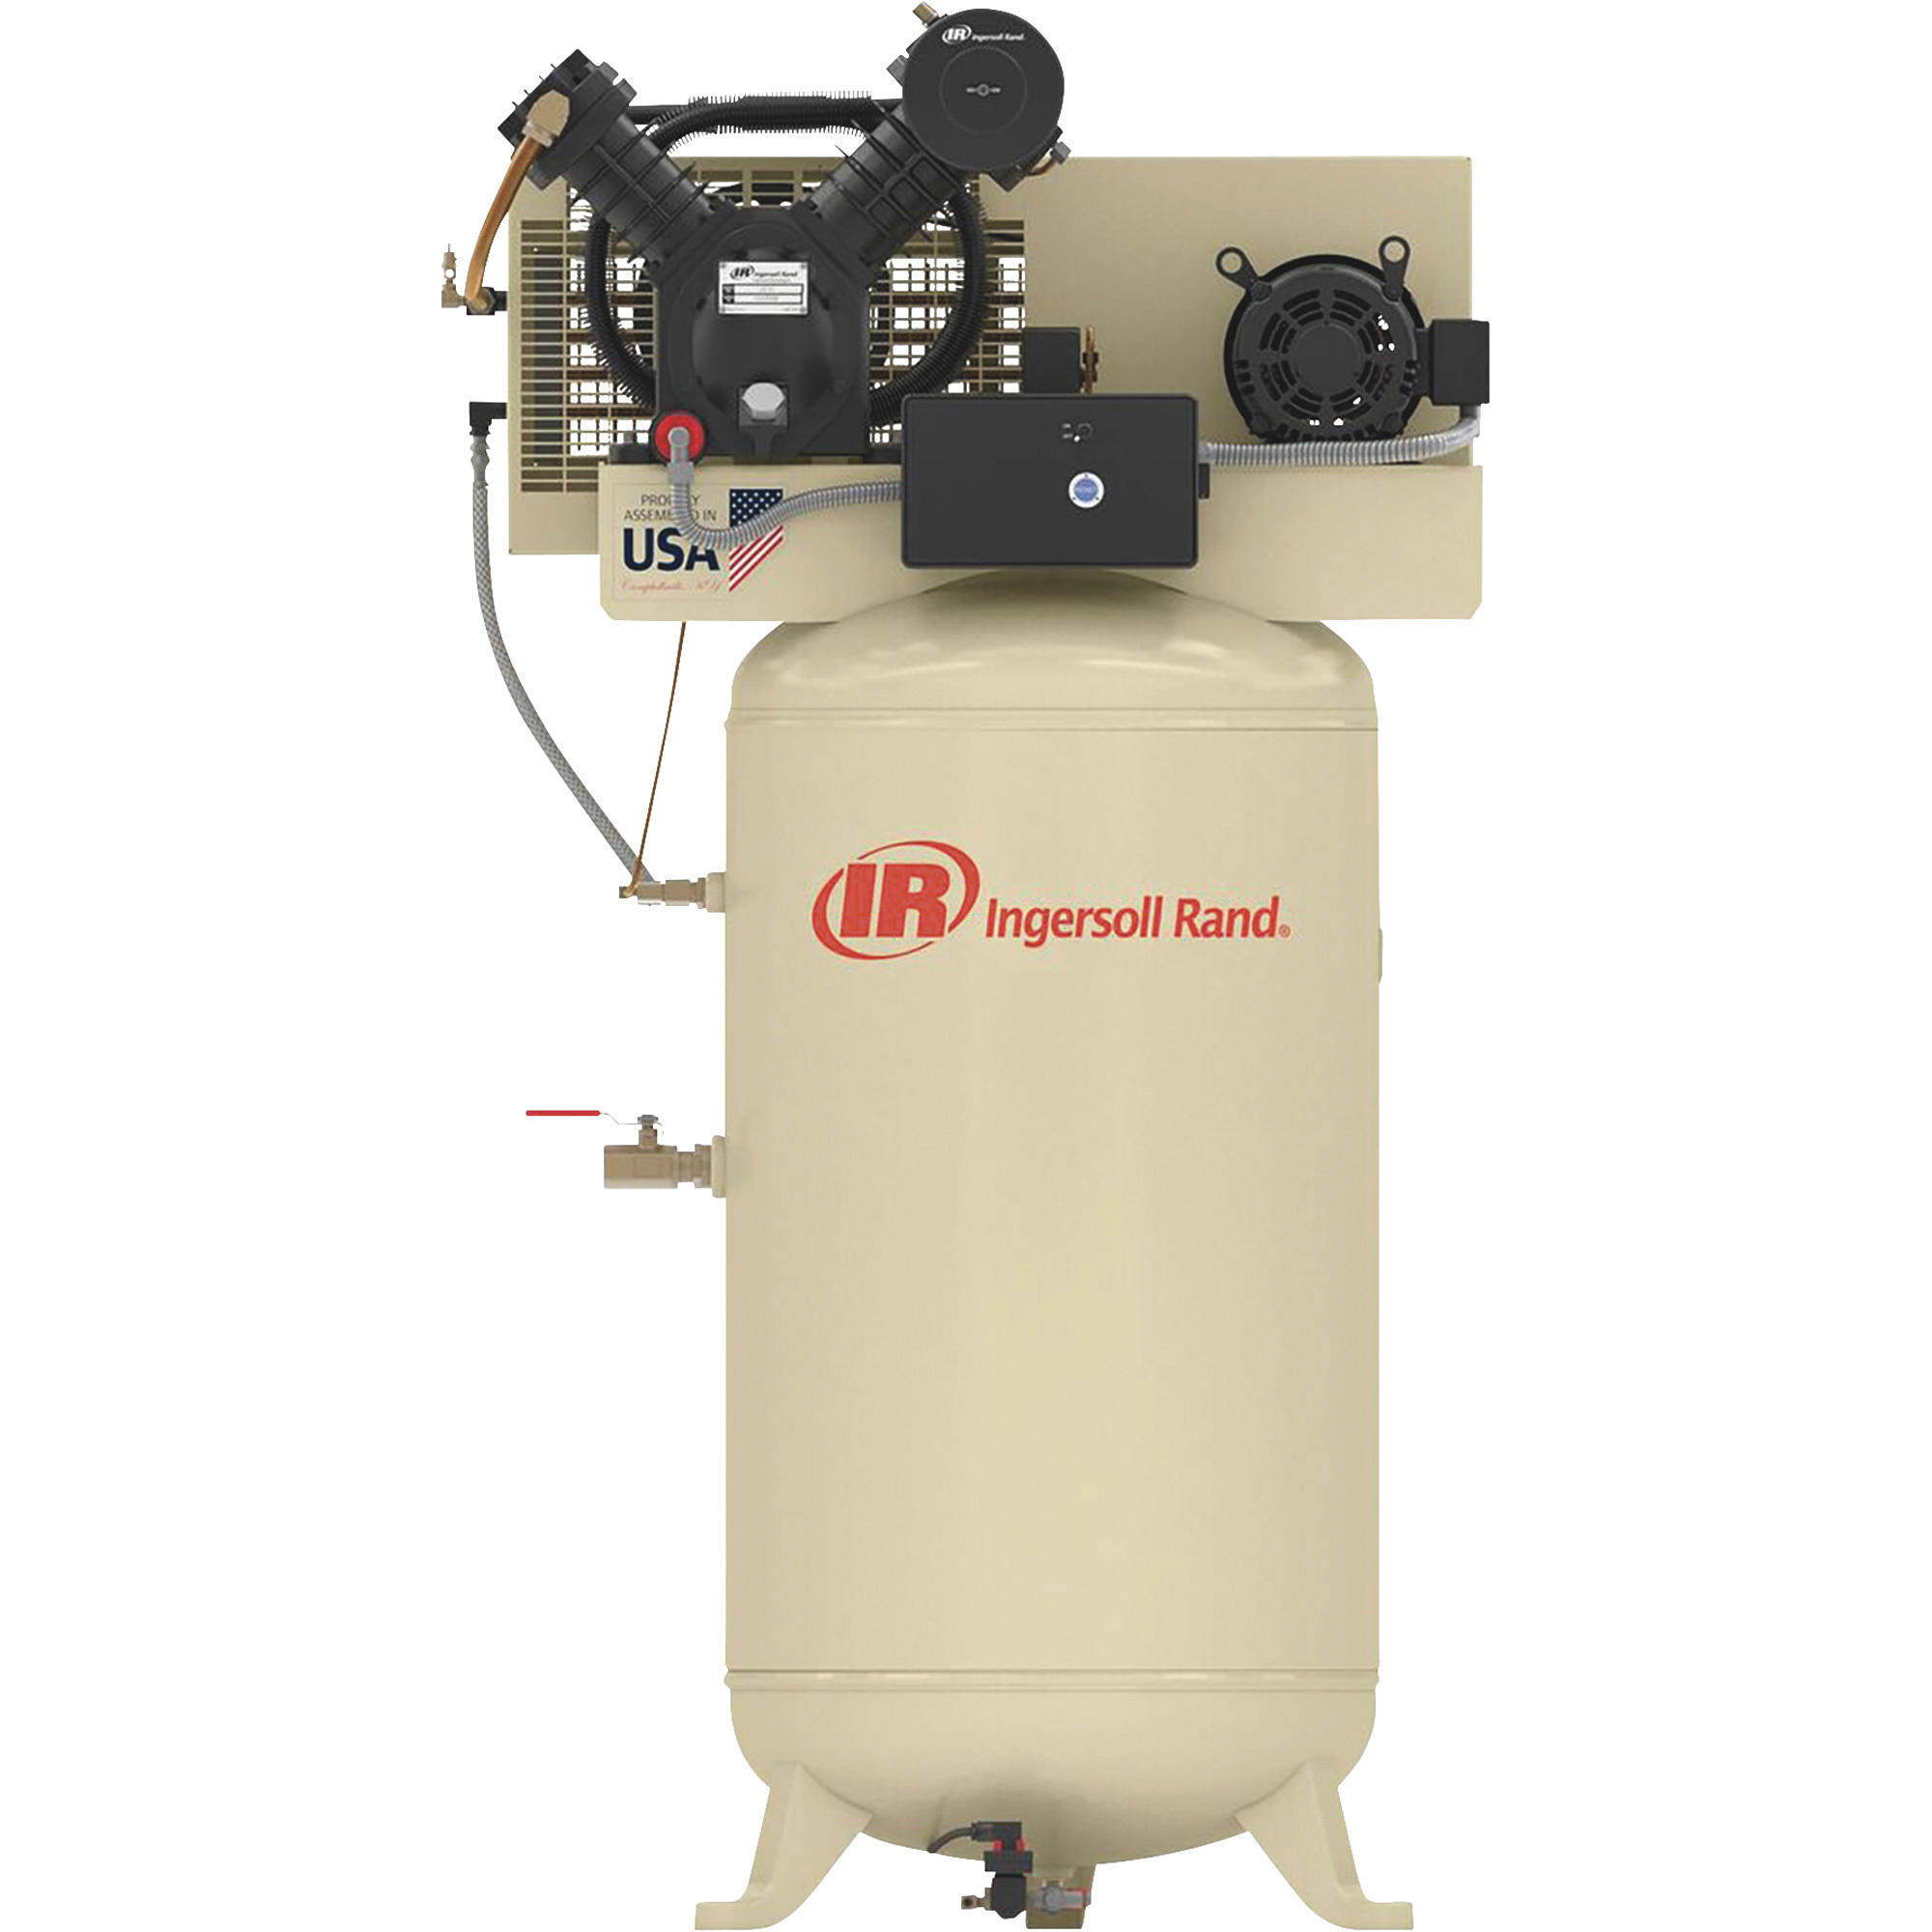 Ingersoll Rand Type 30 Reciprocating Air Compressor Fully Packaged